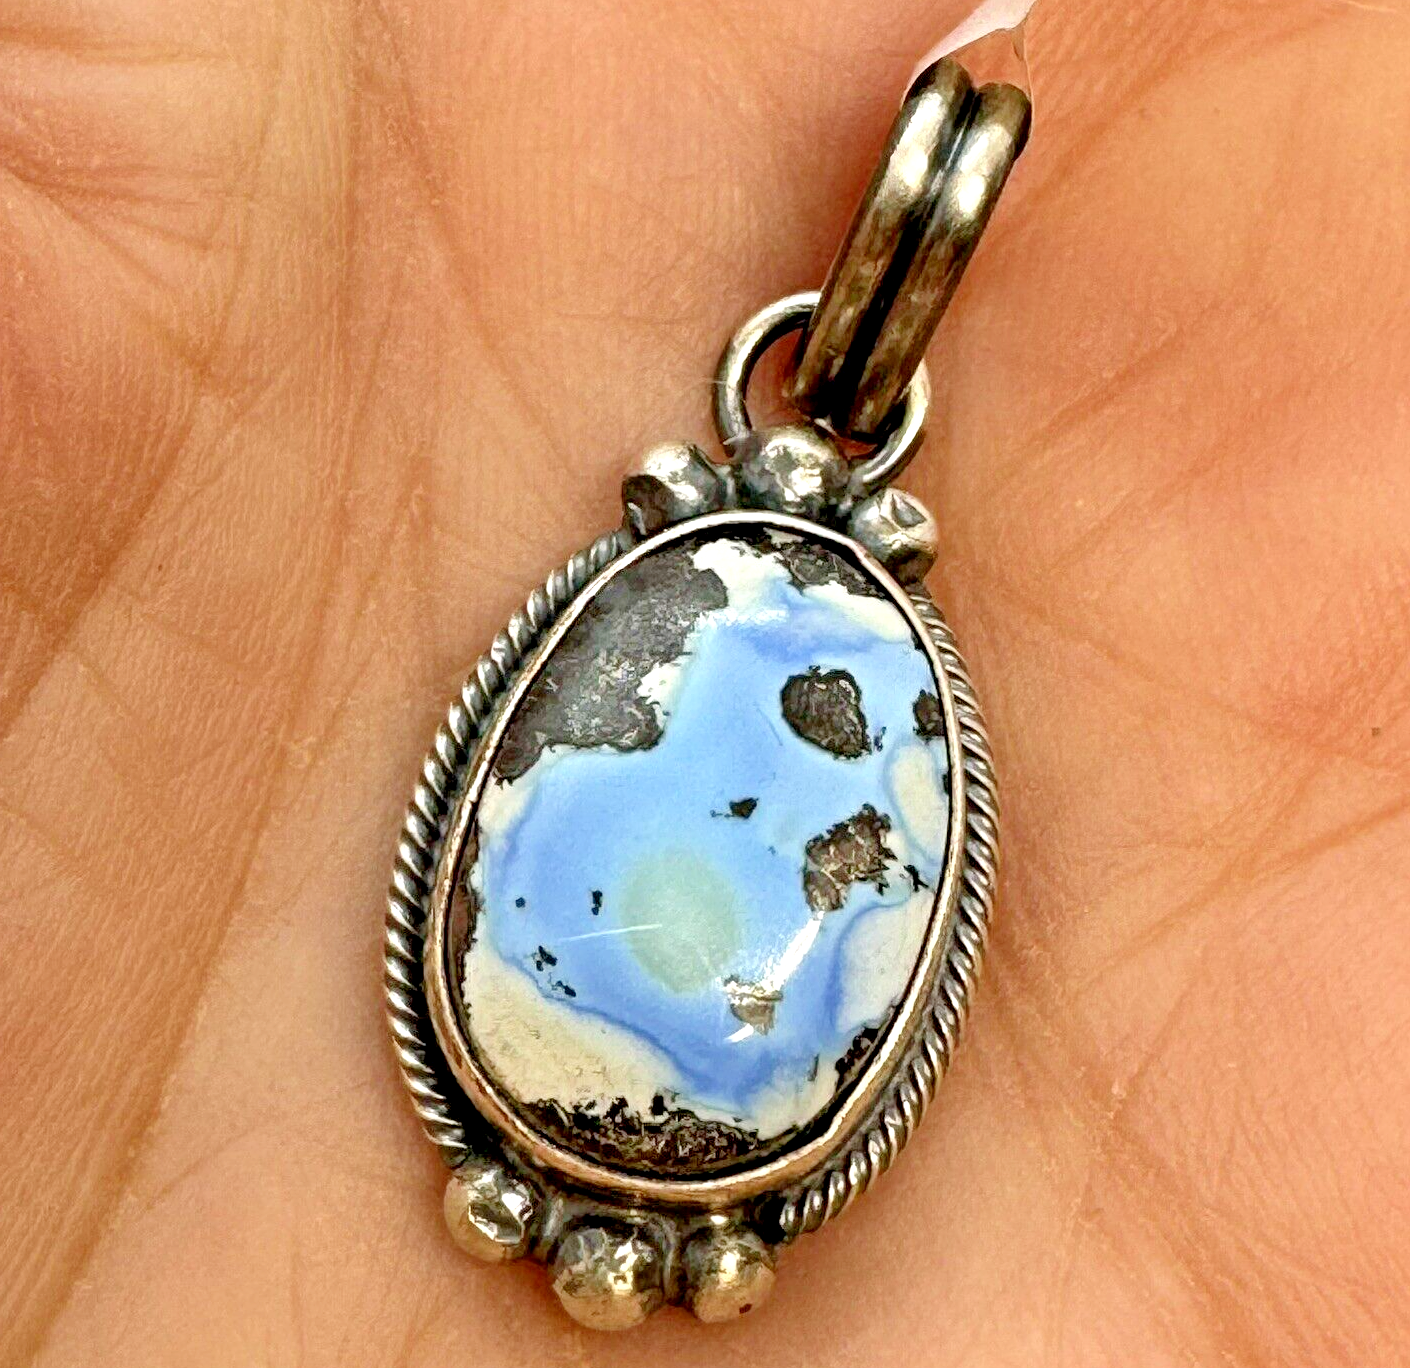 Navajo Golden Hills Turquoise Pendant Sterling Silver 7.2 g by Eli Skeets Native Native American